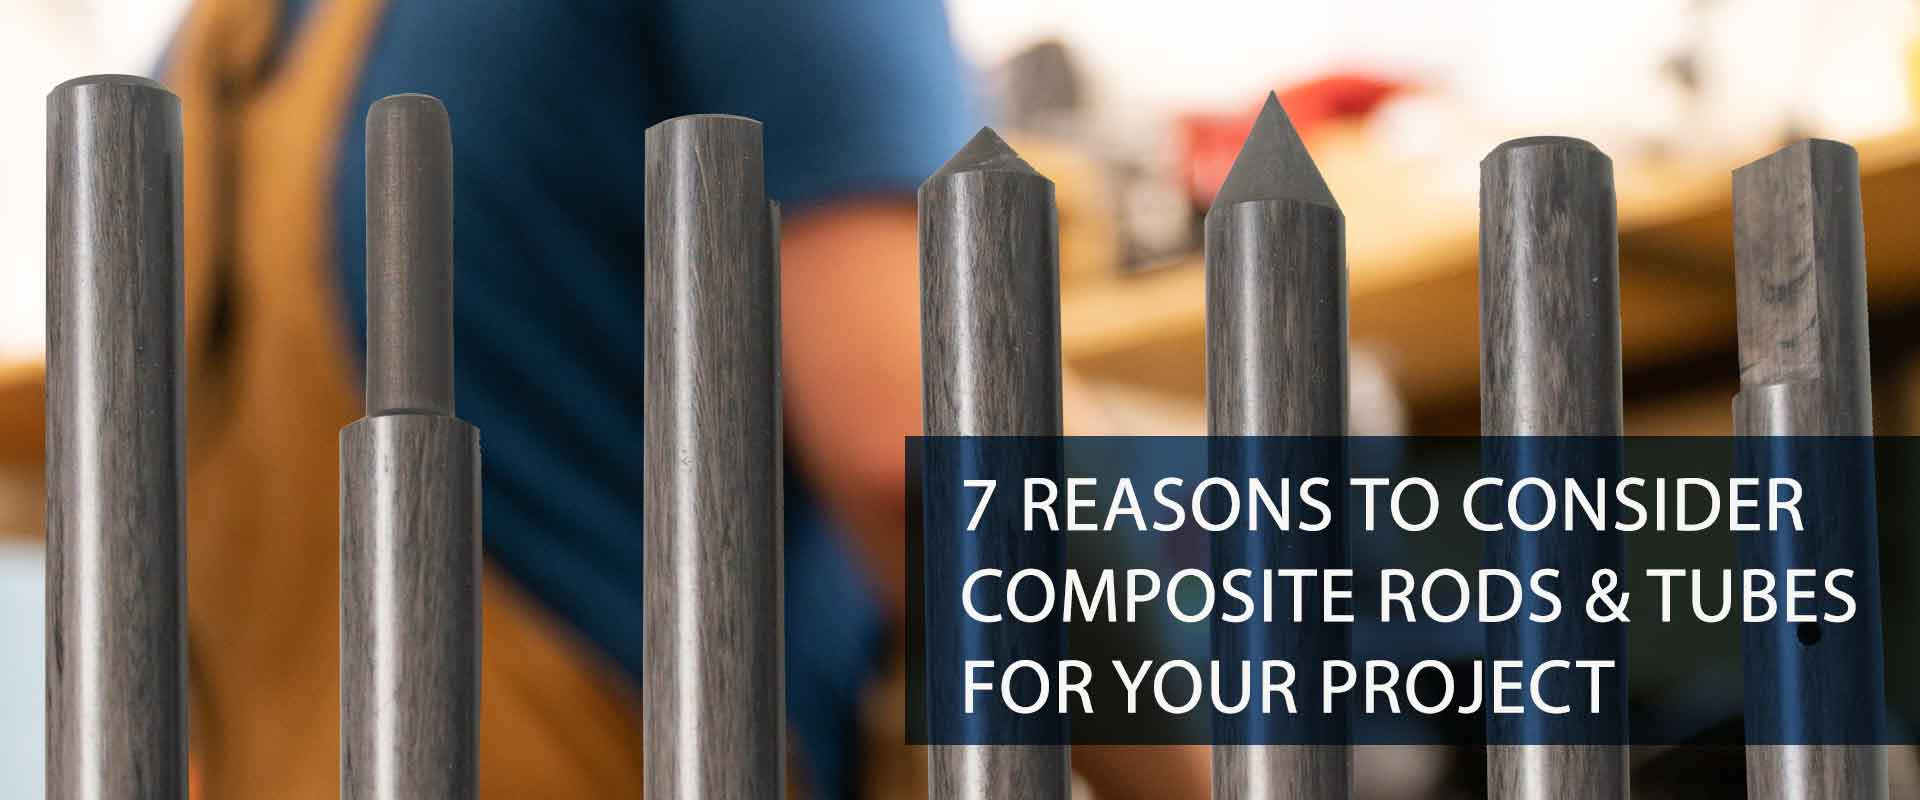 7 reasons to consider composite rods and tubes for your project